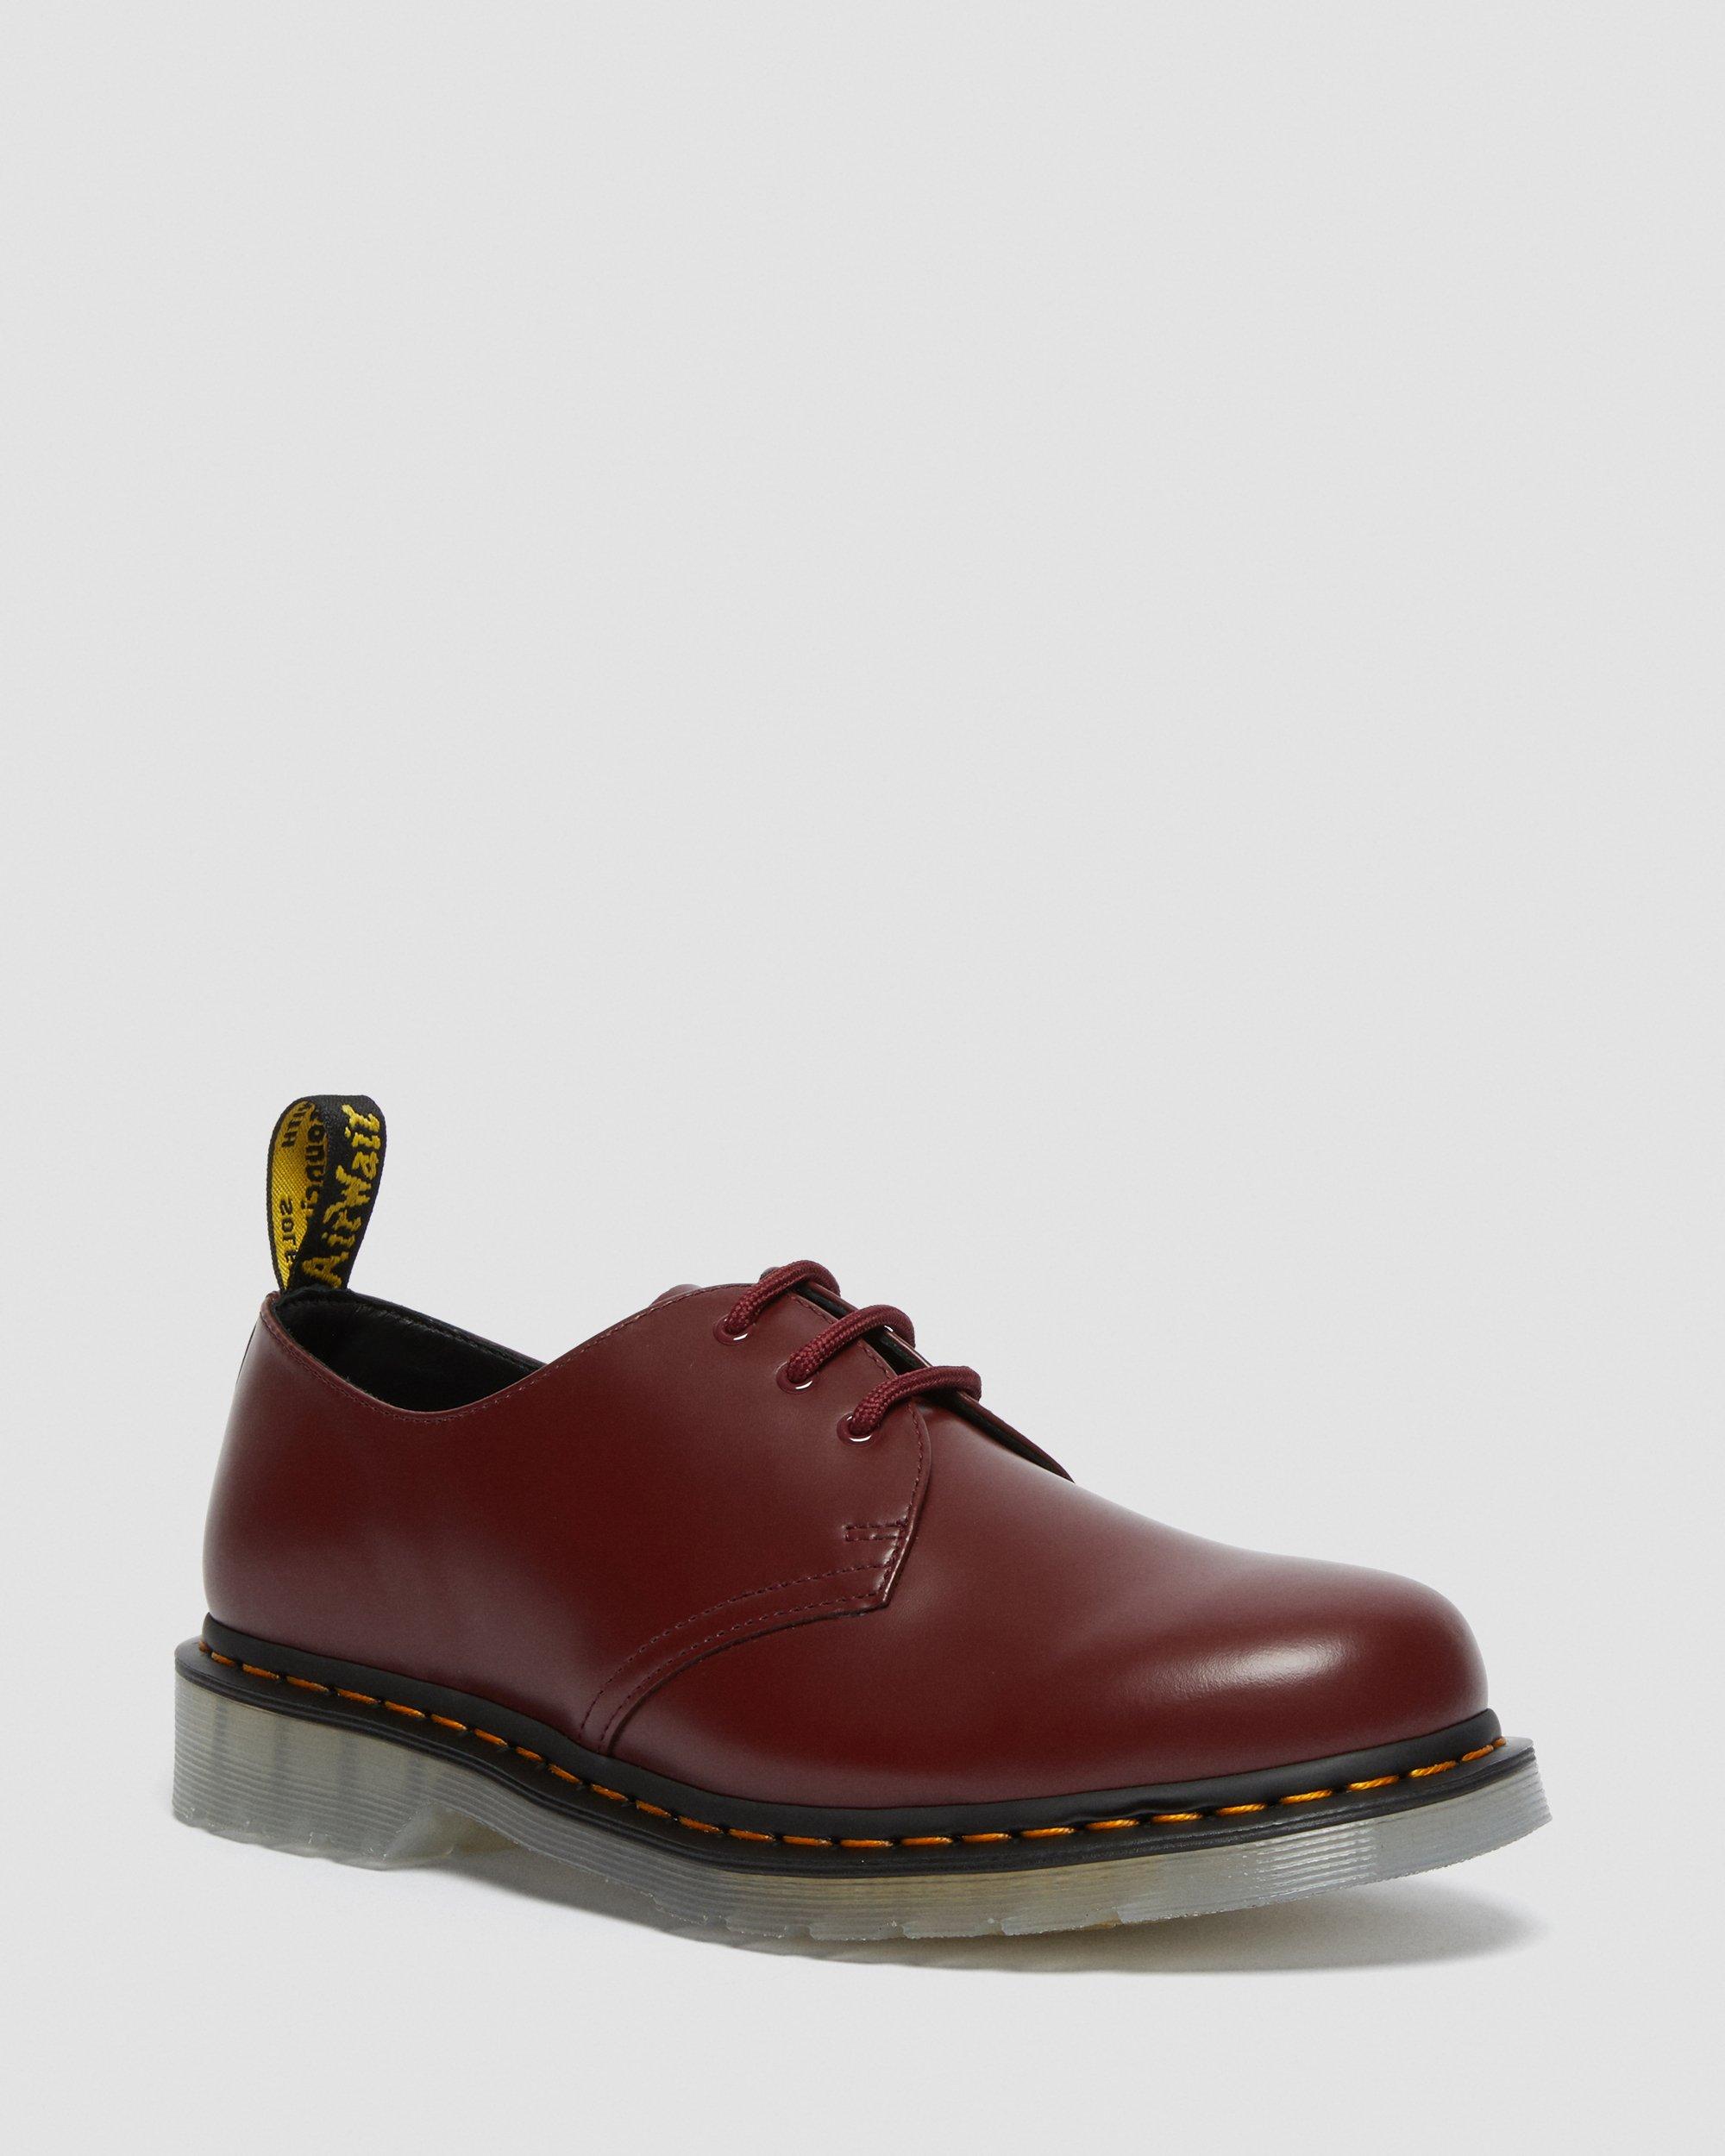 1461 Iced Smooth Leather Oxford Shoes in Cherry Red | Dr. Martens